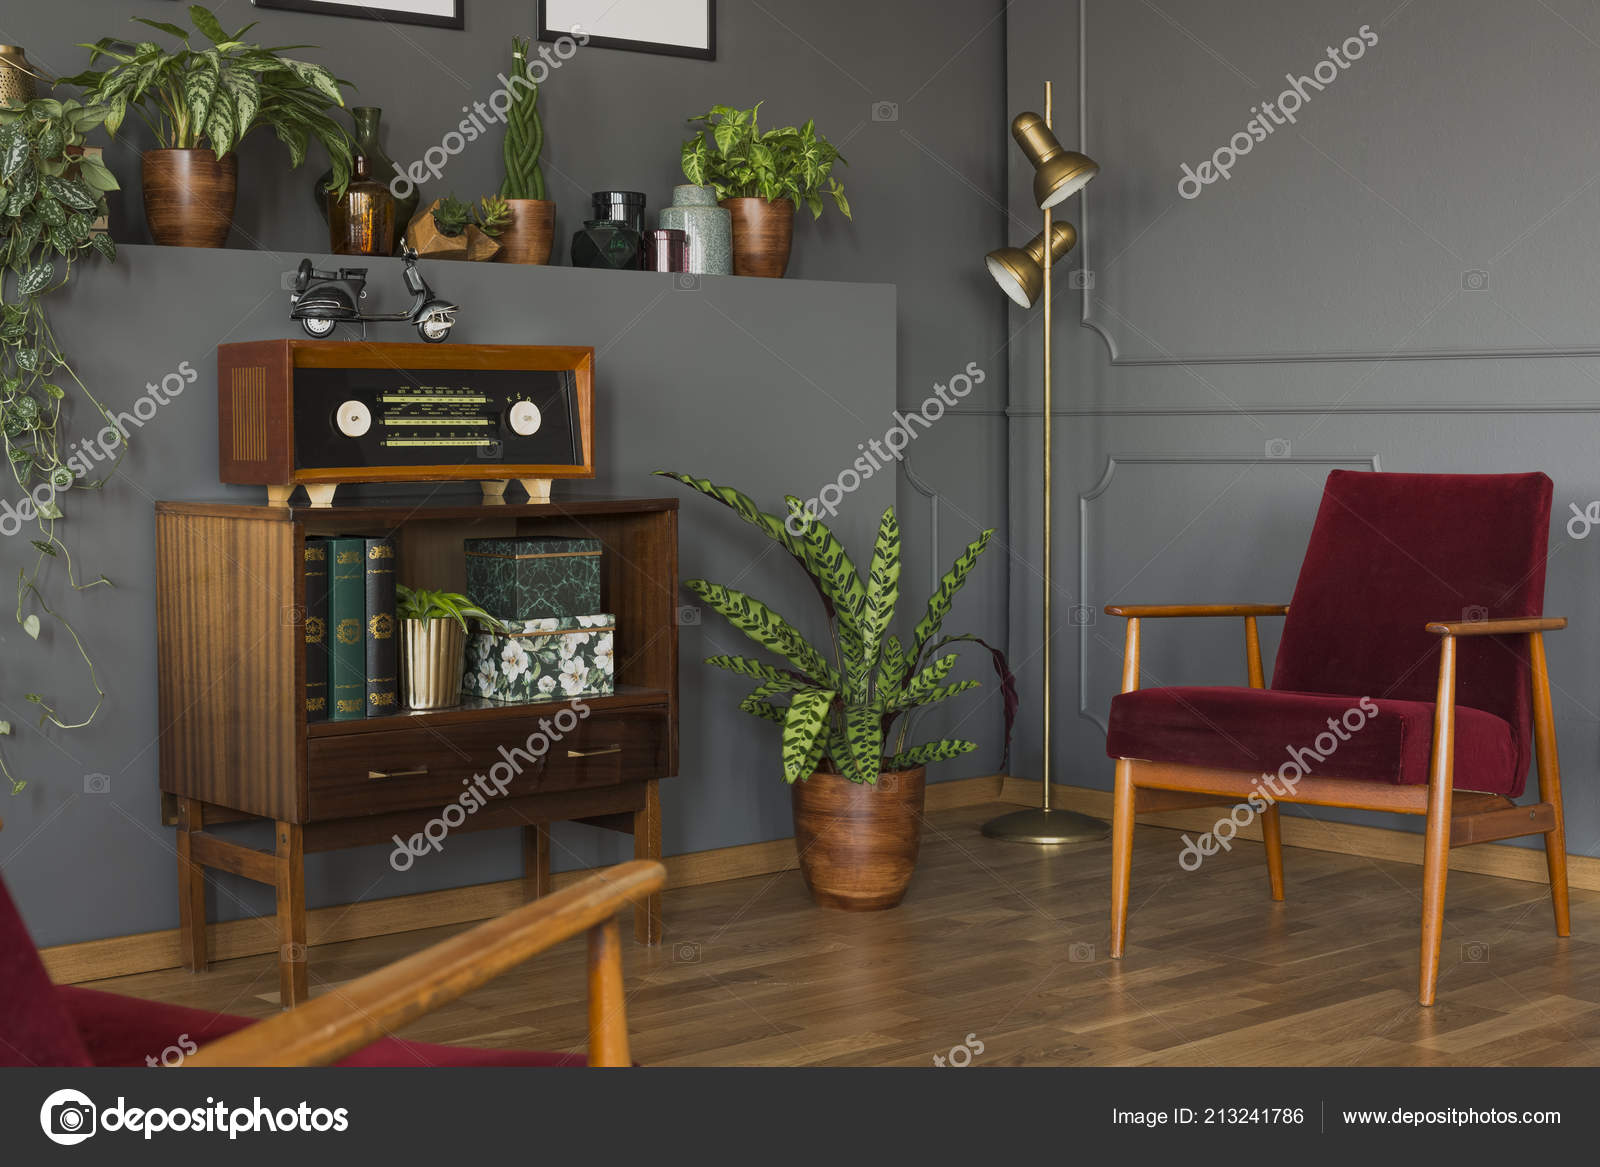 Radio Wooden Cabinet Next Plant Red Armchair Grey Vintage Living